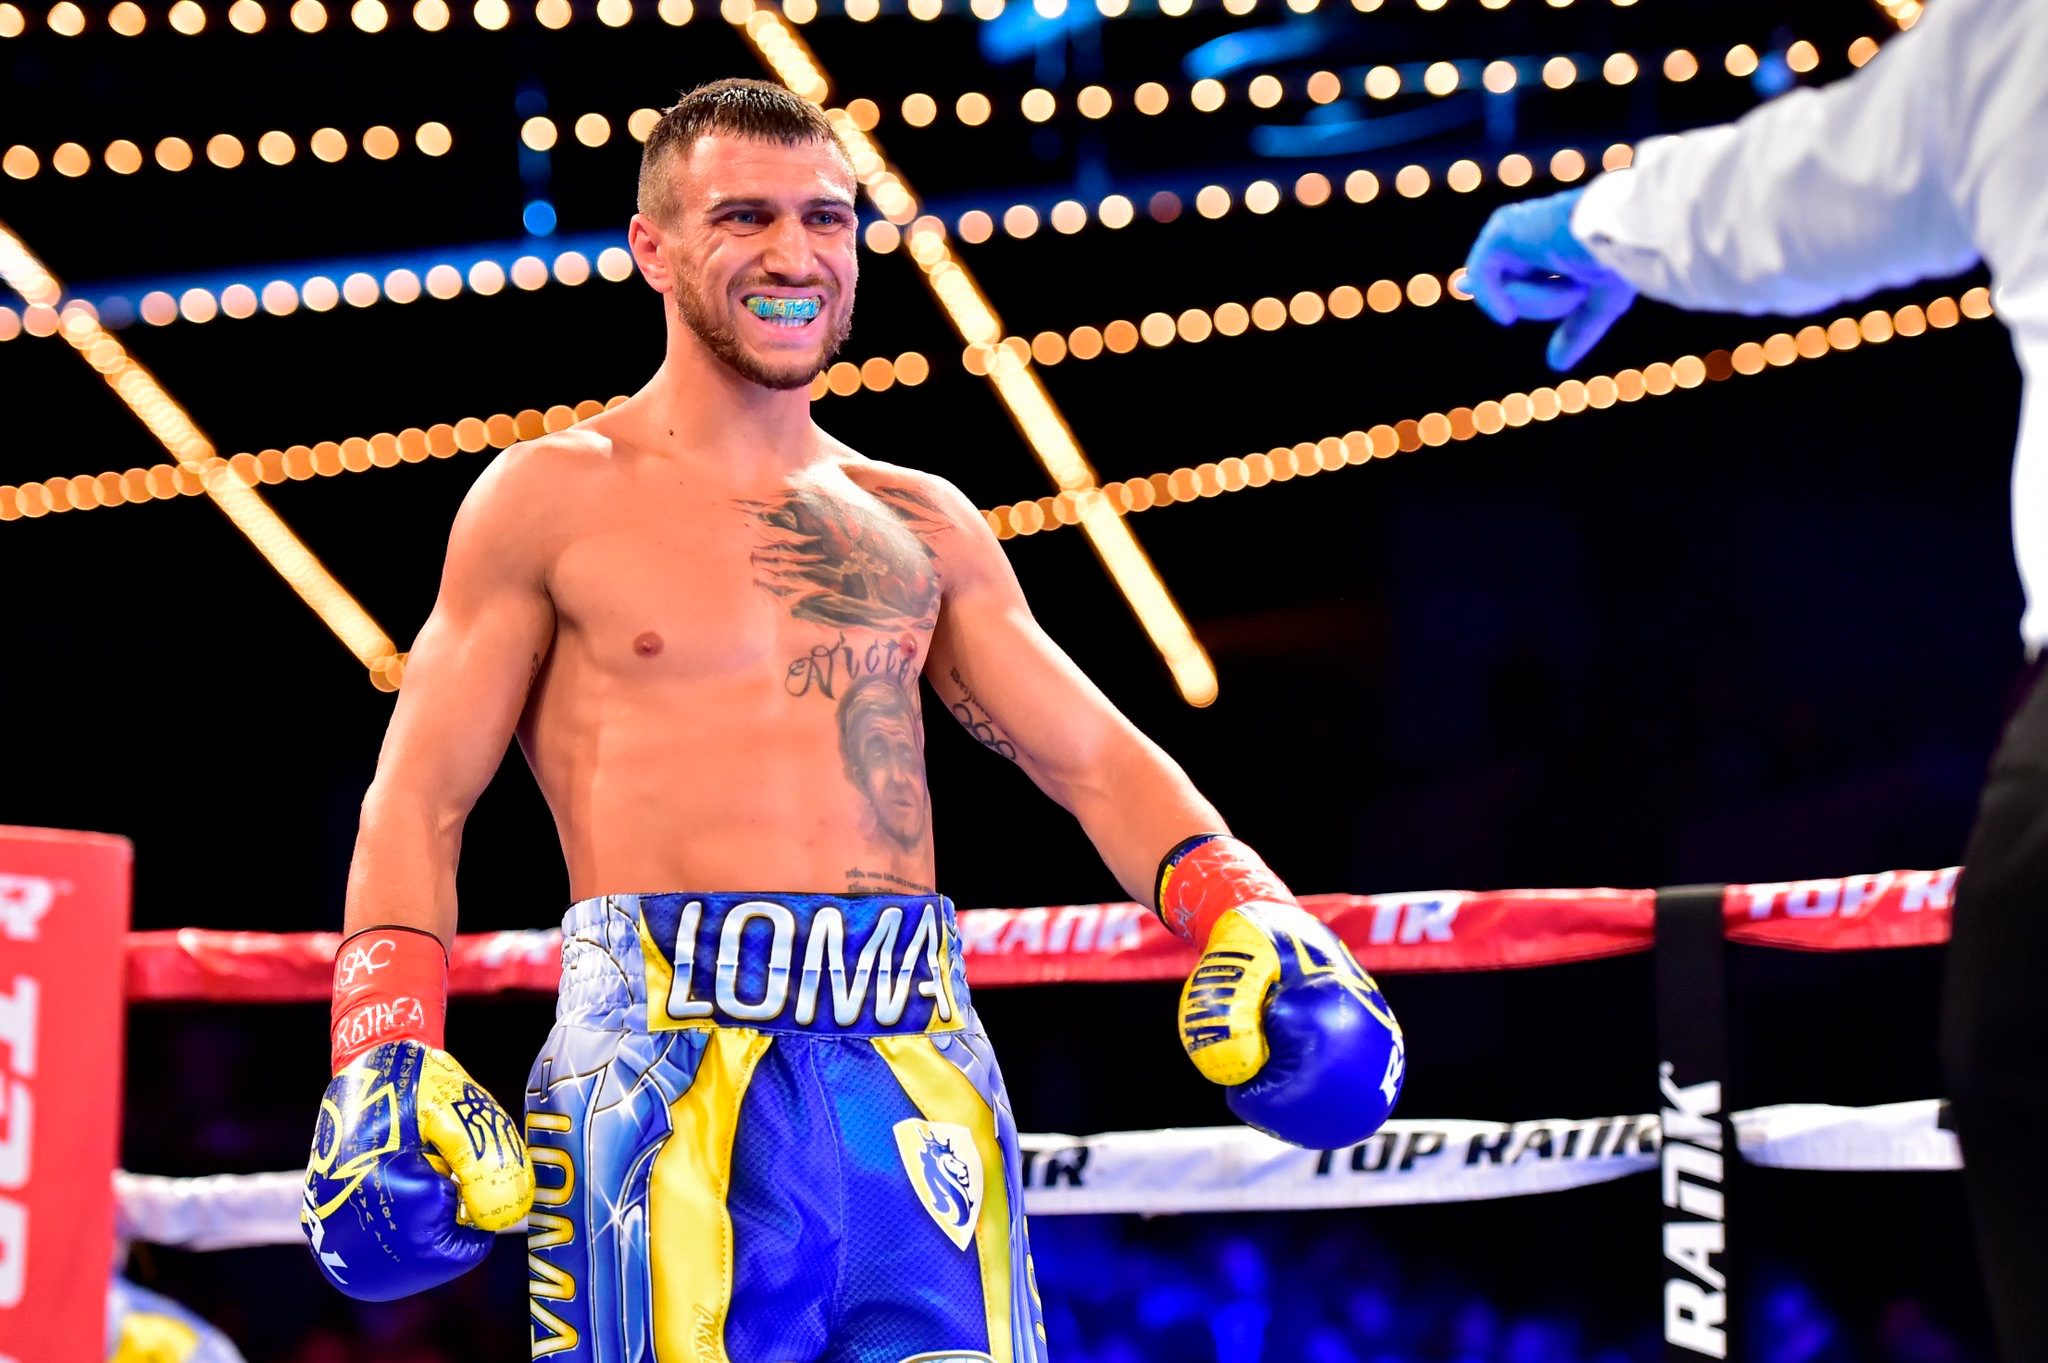 Lomachenko returns from injury in lightweight unification bout